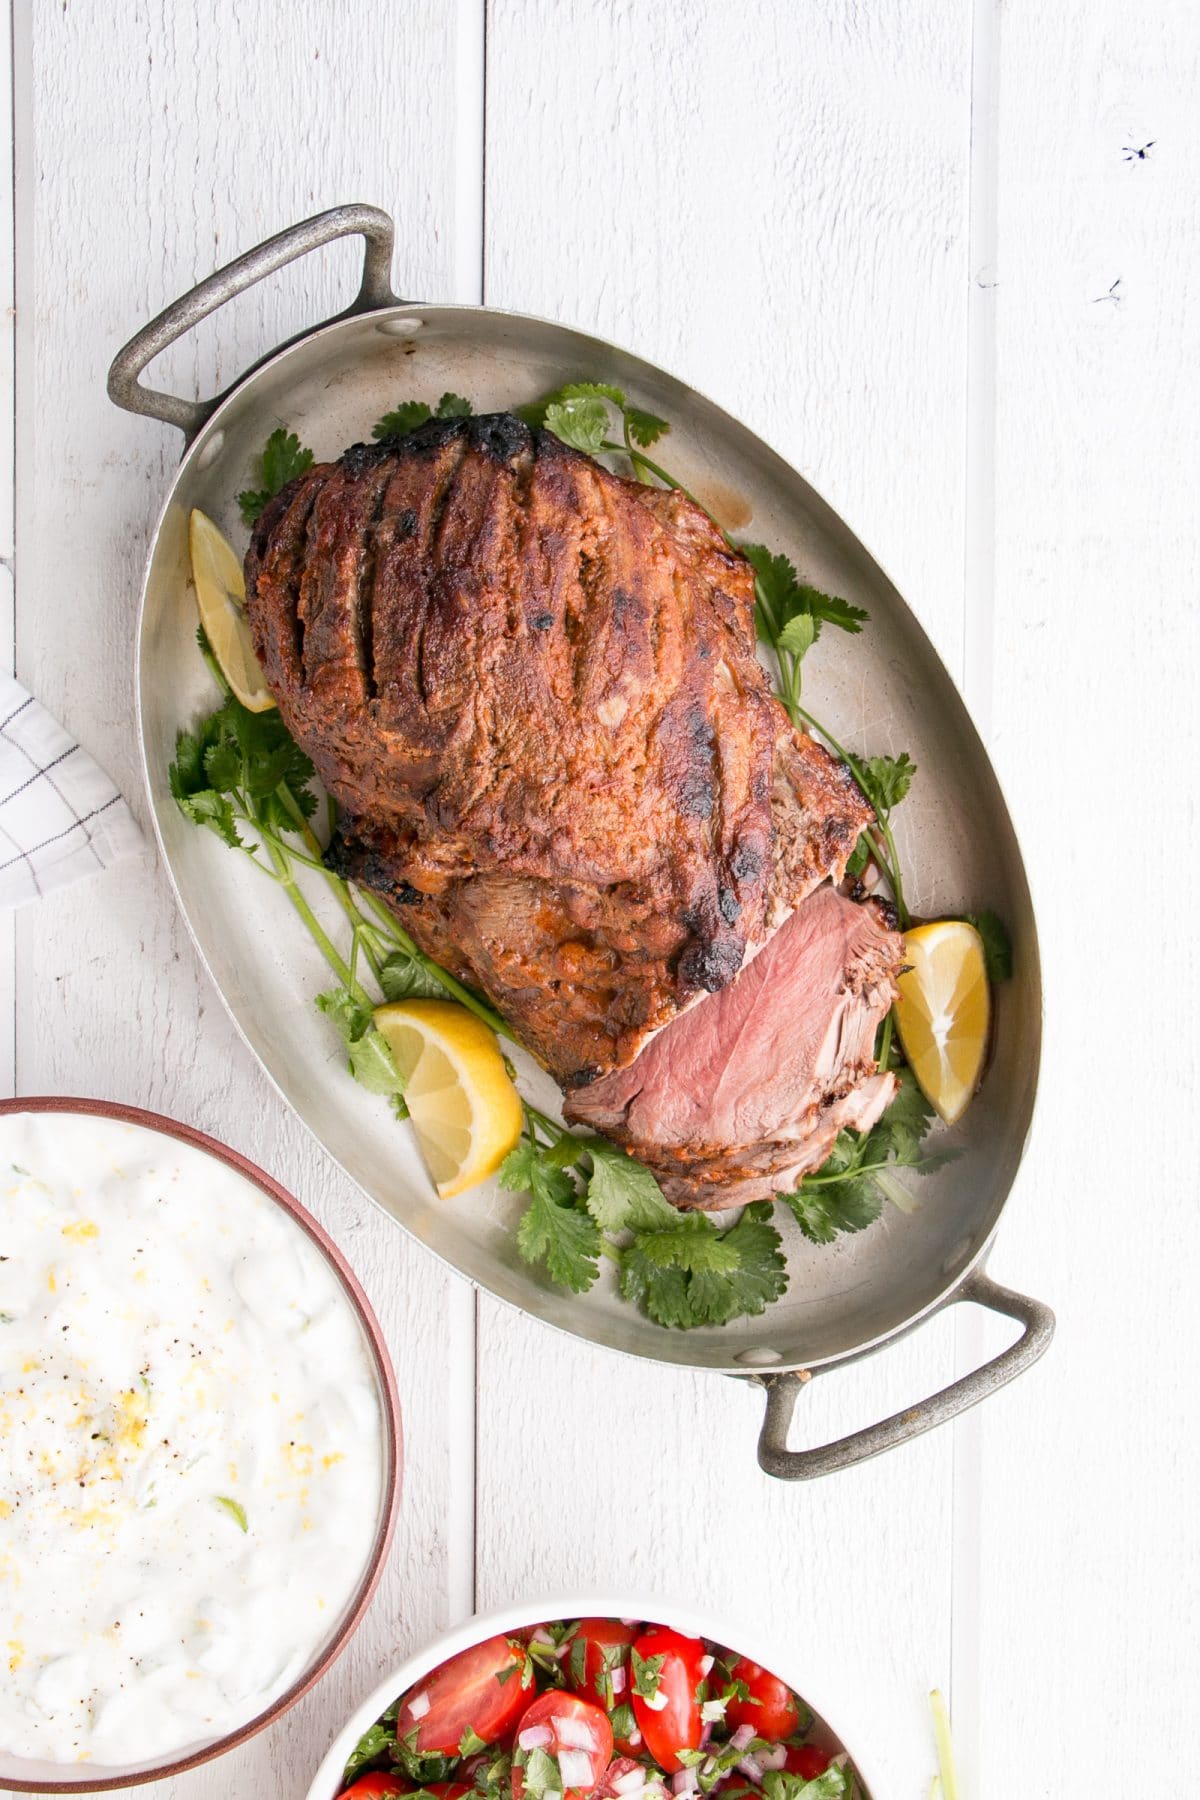 Curry spiced leg of lamb, partially sliced in a serving dish